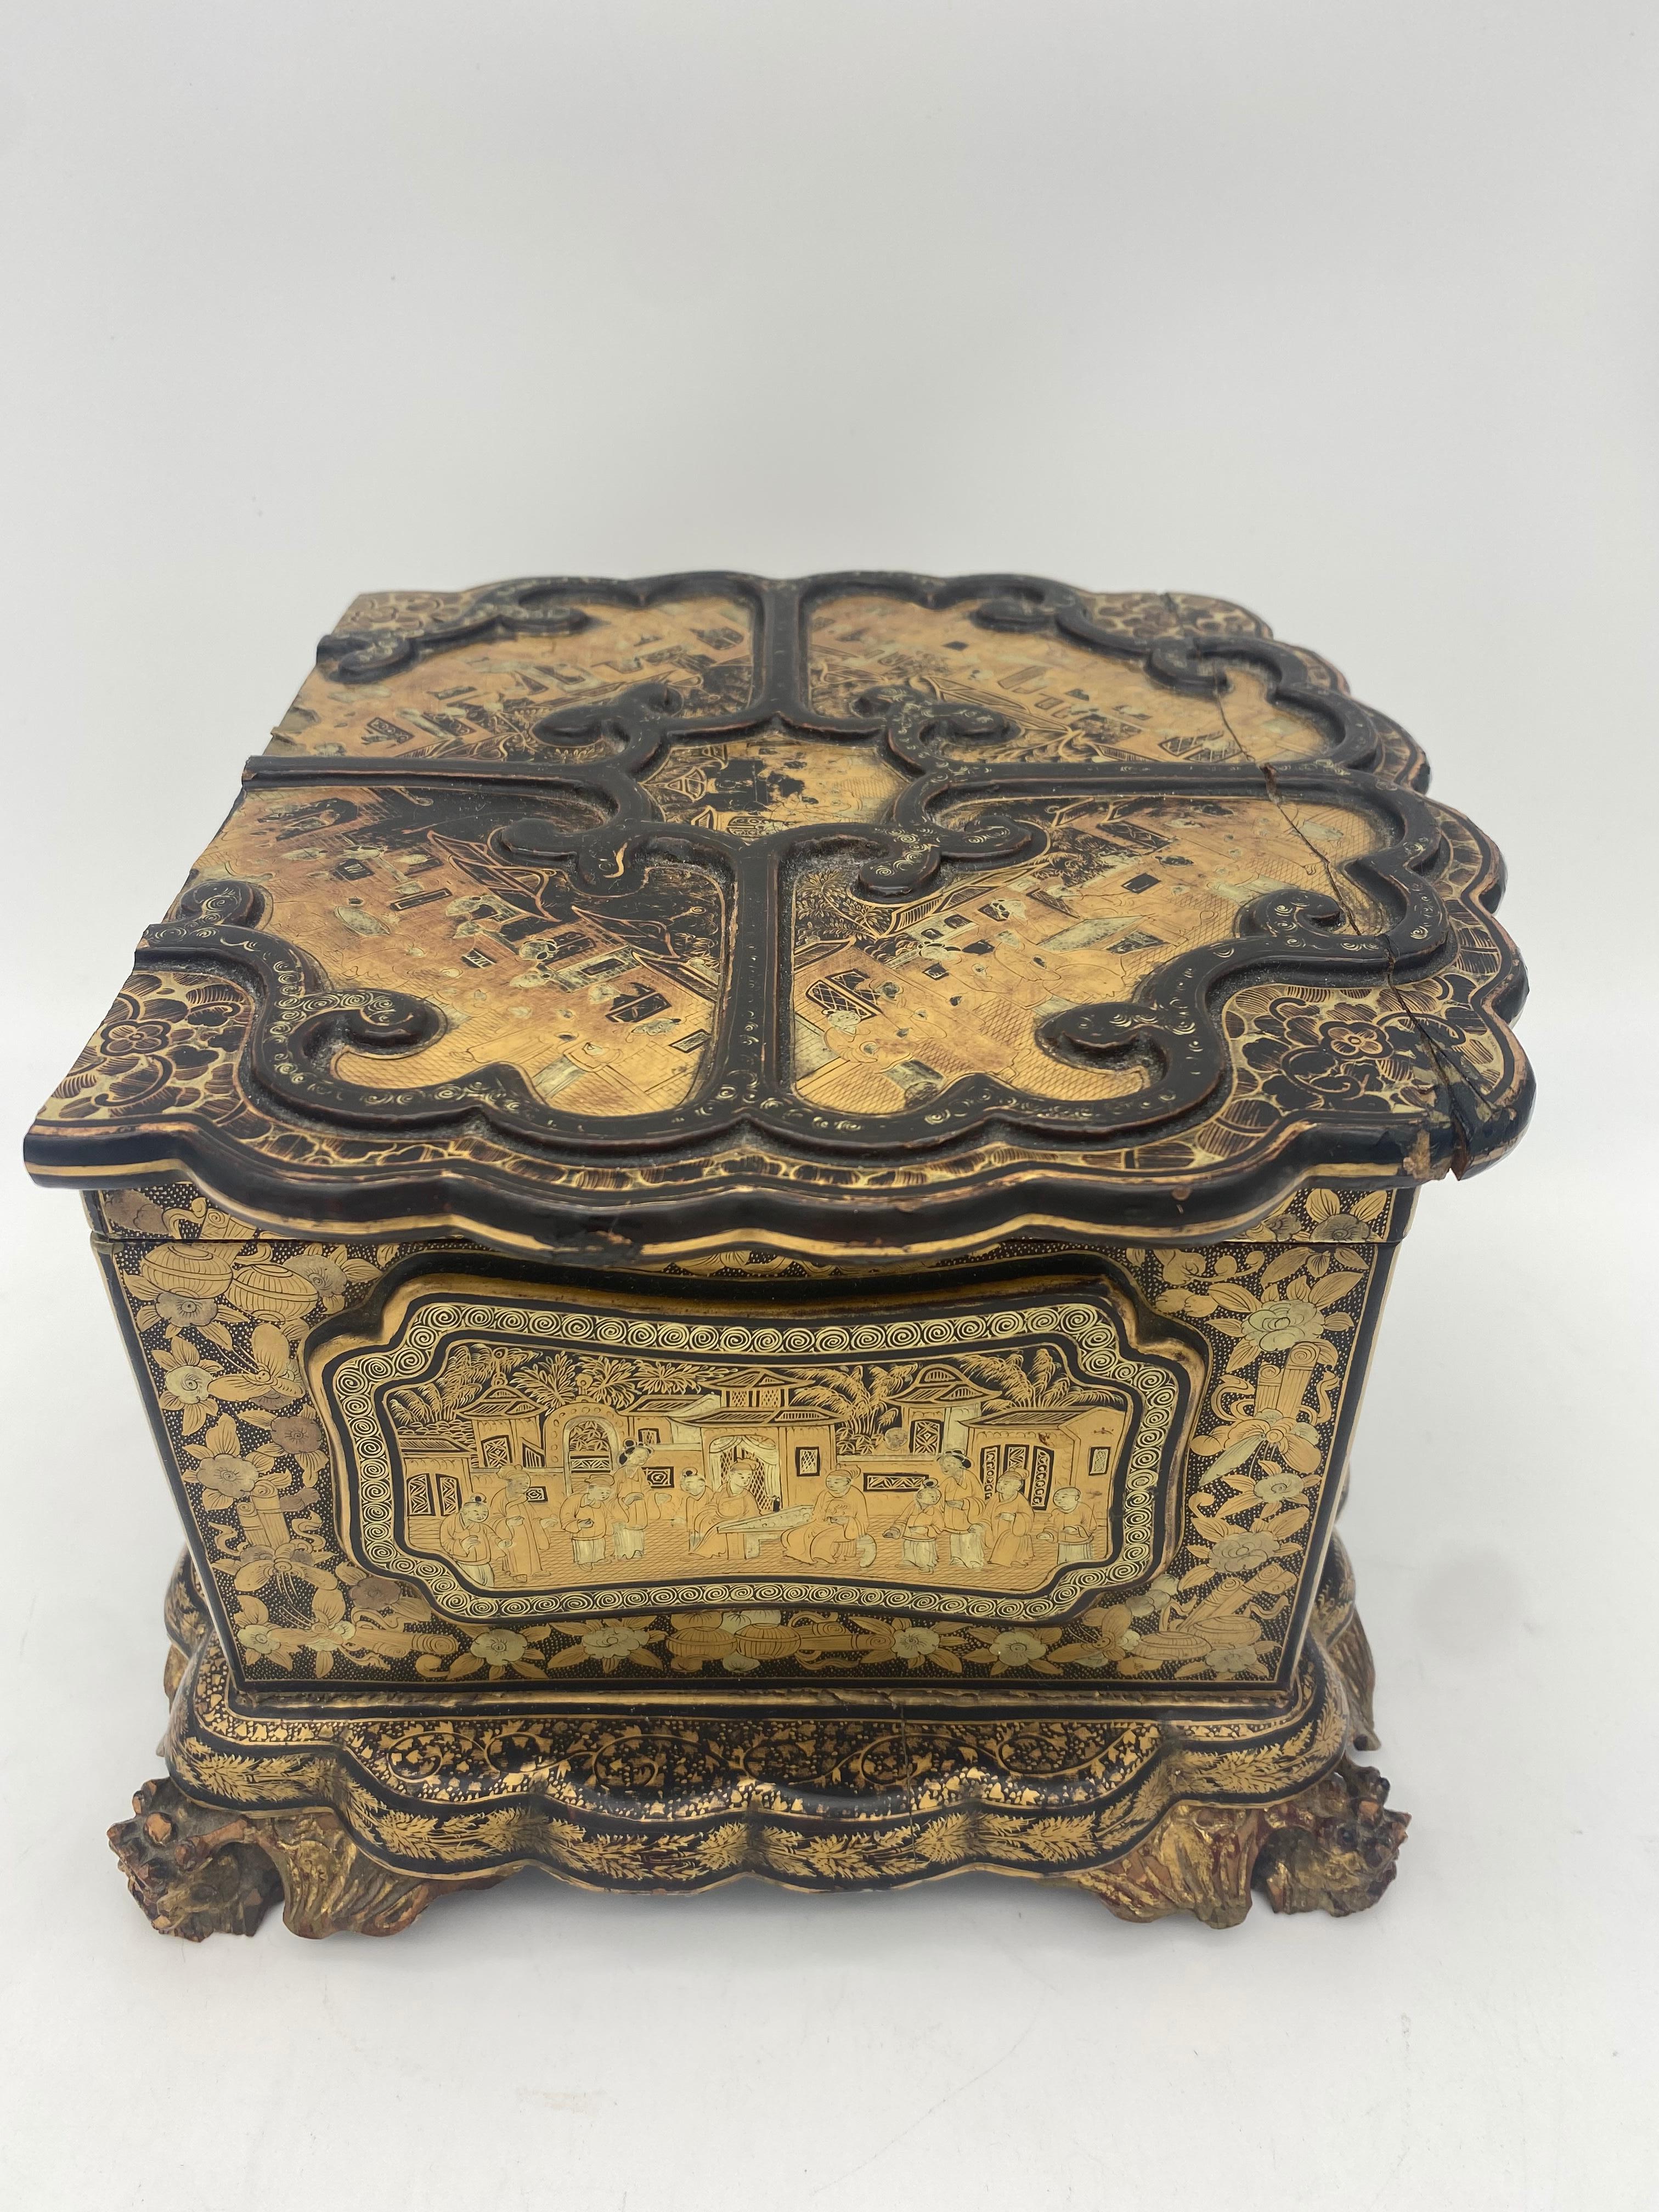 Unique 19th Century  Export Chinese Gilt Chinoiserie Lacquer Box For Sale 6